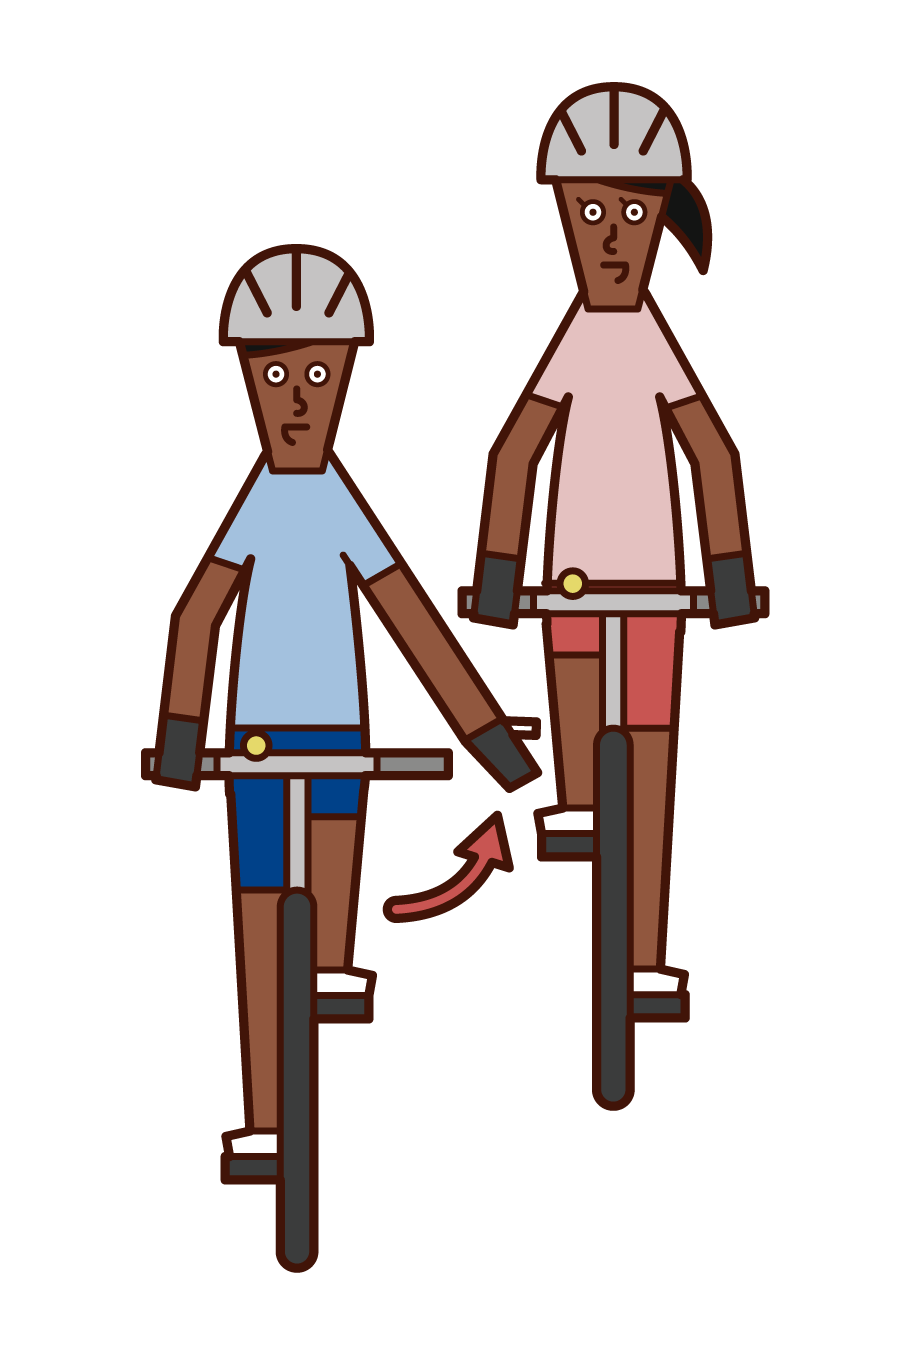 Illustration of a bicycle hand signal and a man who has you go ahead